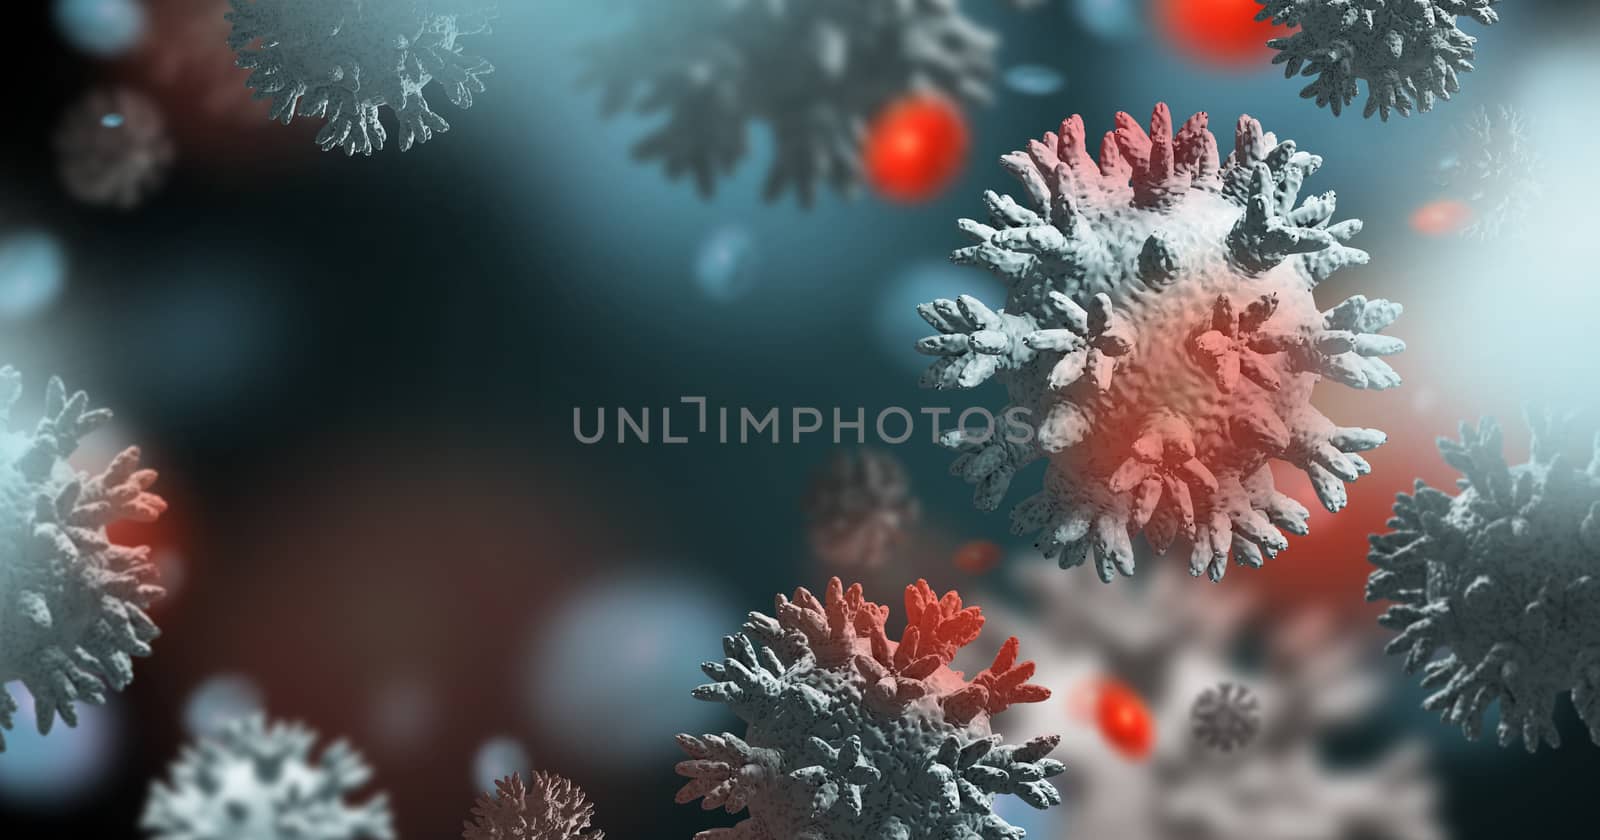 Coronavirus outbreak background with copy space 3D Render